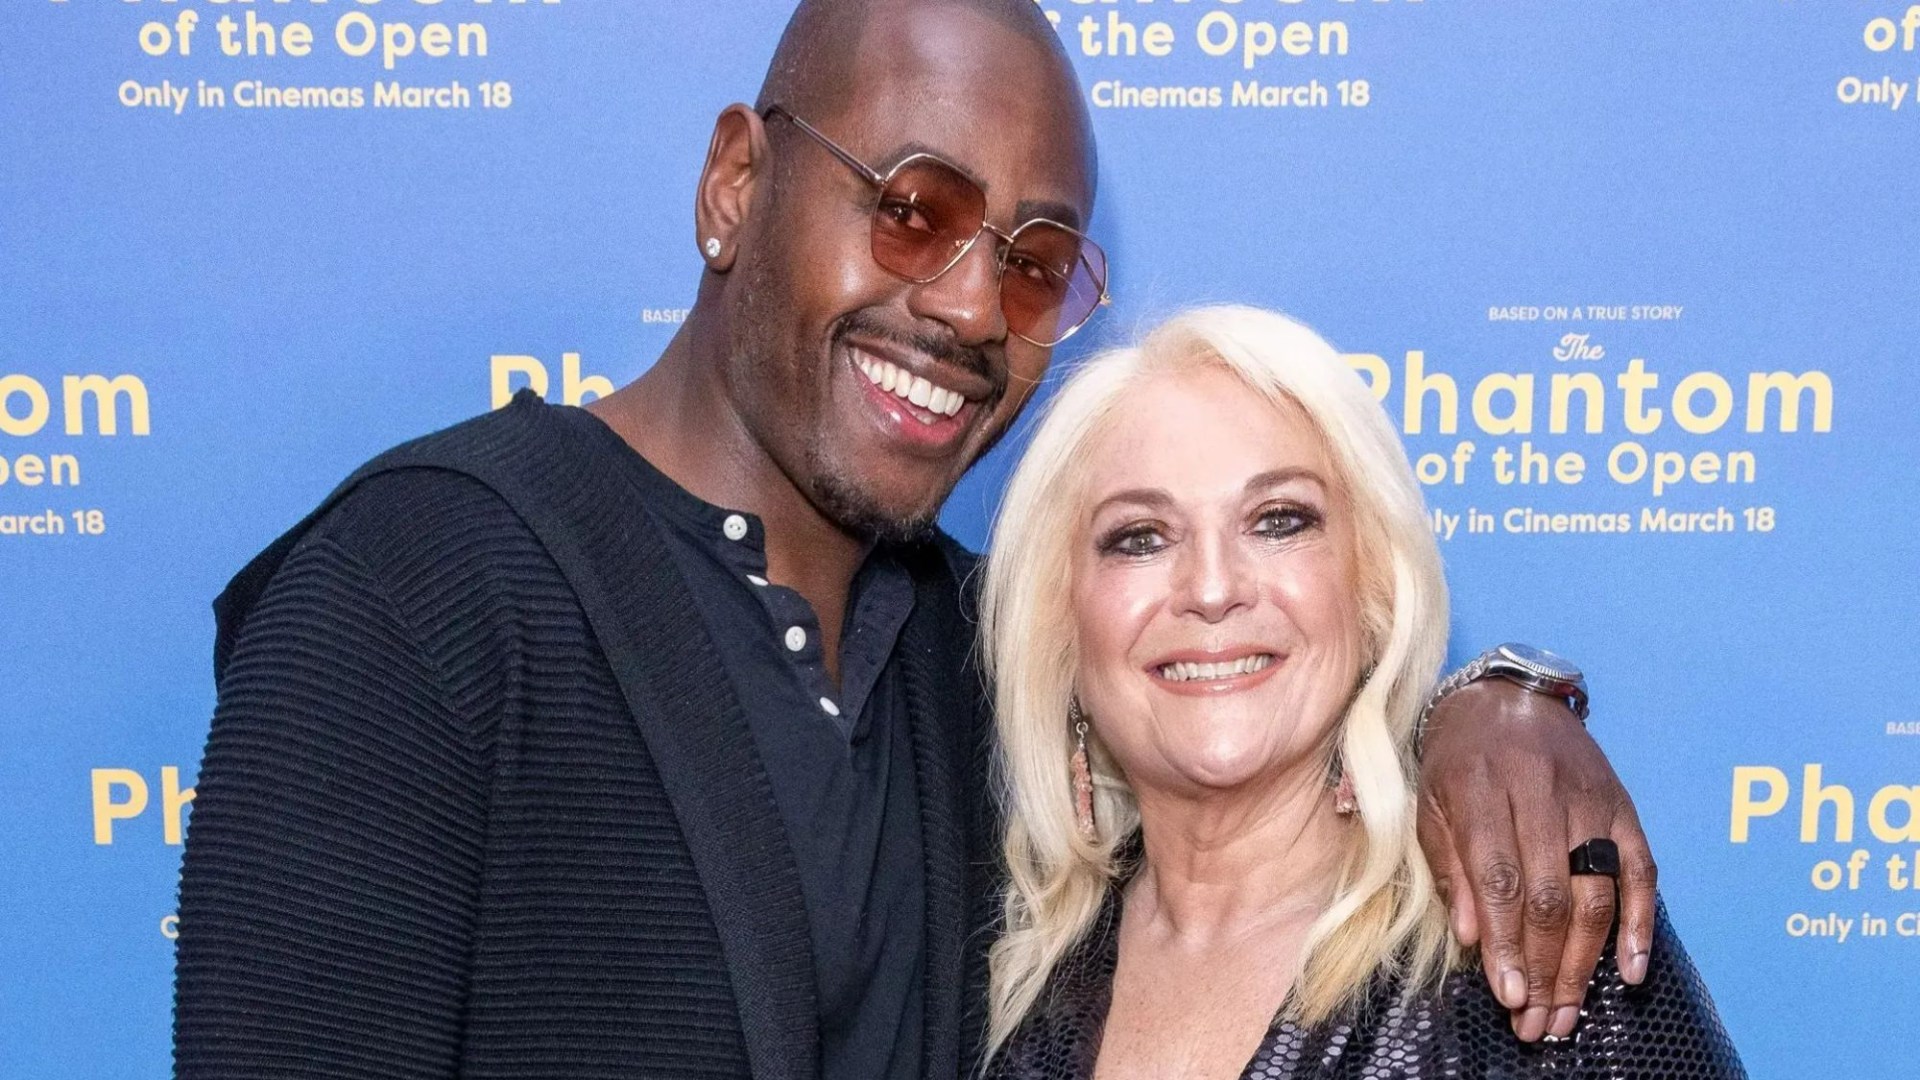 Vanessa Feltz, star of Celebs Go Dating, takes a swipe at Ben Ofoedu for cheating on her as she flirts and plays with famous co-star